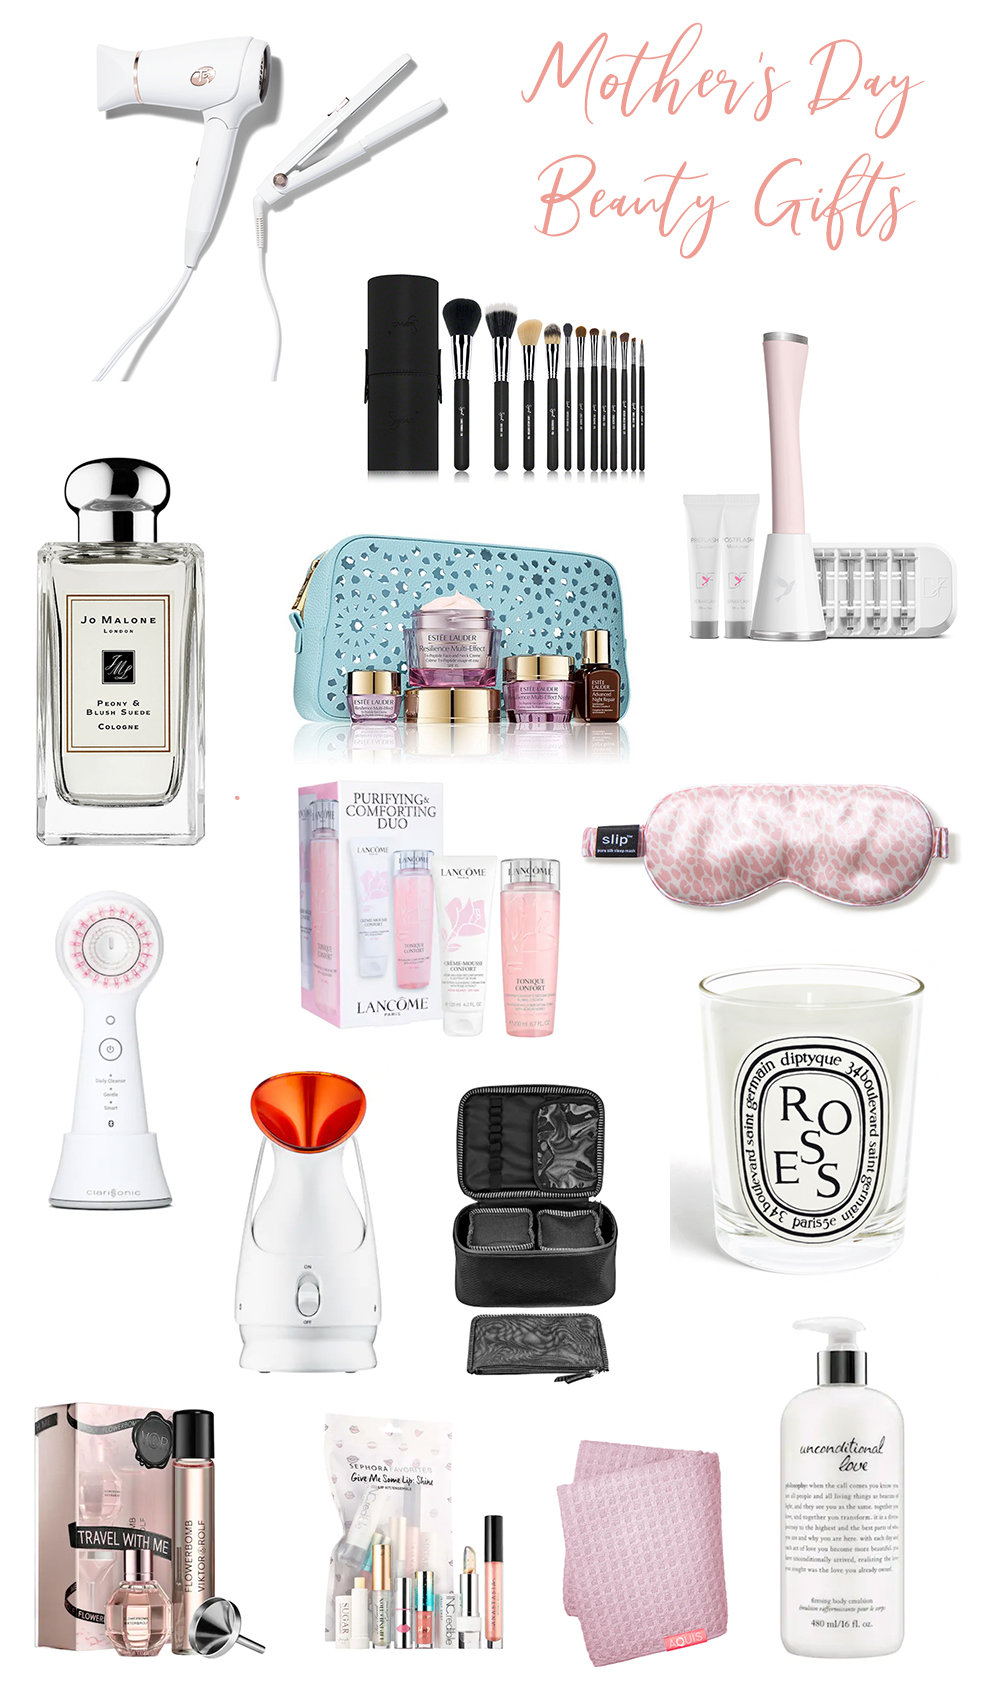 Mother's Day Gifts - The Best Guide of 2019! Everything from home decor, cozy gifts, fashion & accessories, to beauty.. we linked something for everyone! | Kristy Wicks